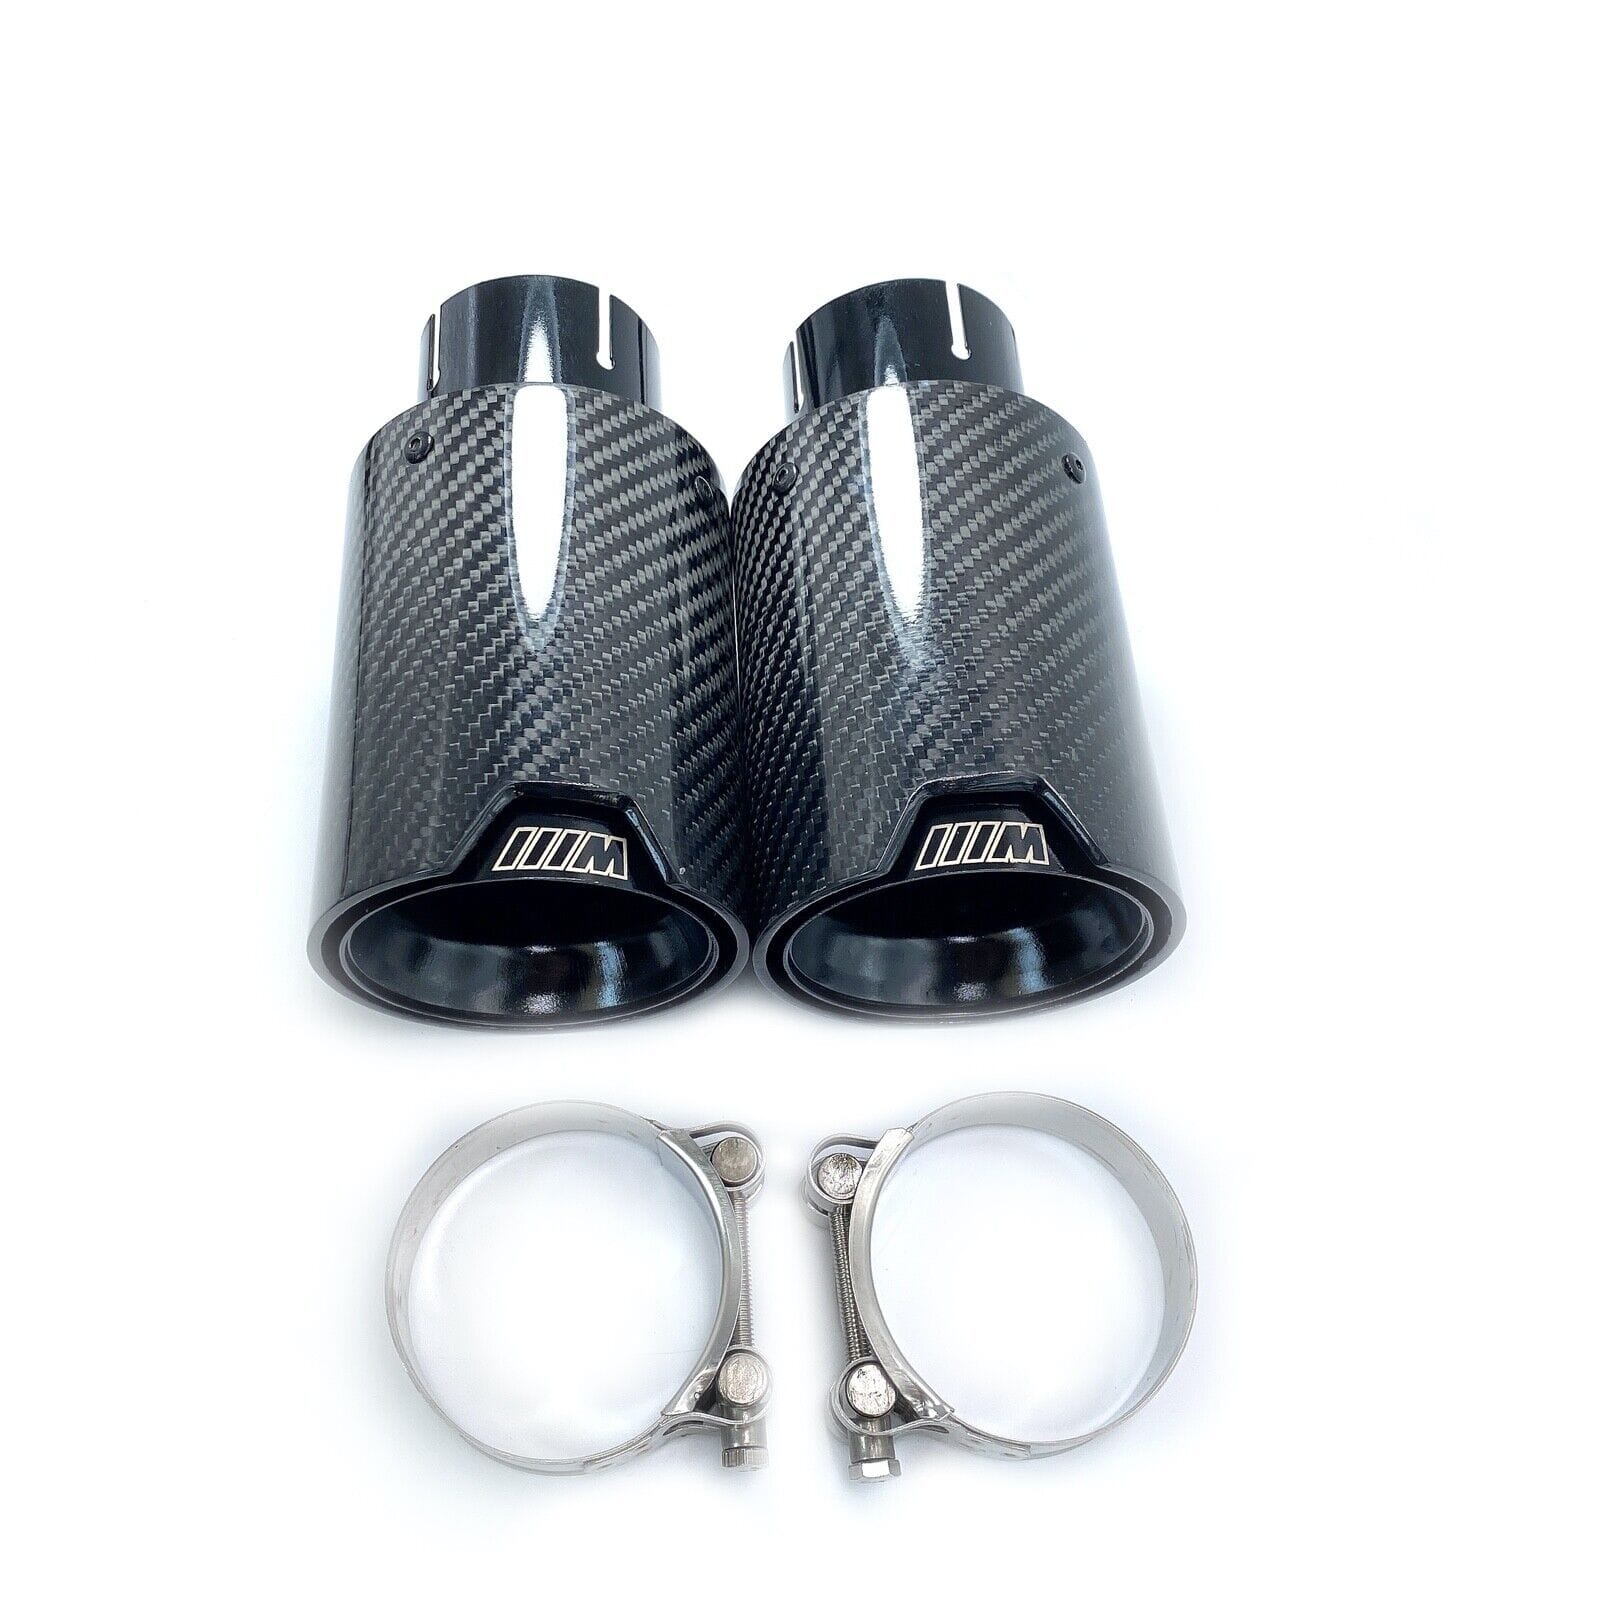 BMW M Performance 2.5in Inlet to 3.5in Outlet Carbon Fiber Dual Exhaust tips